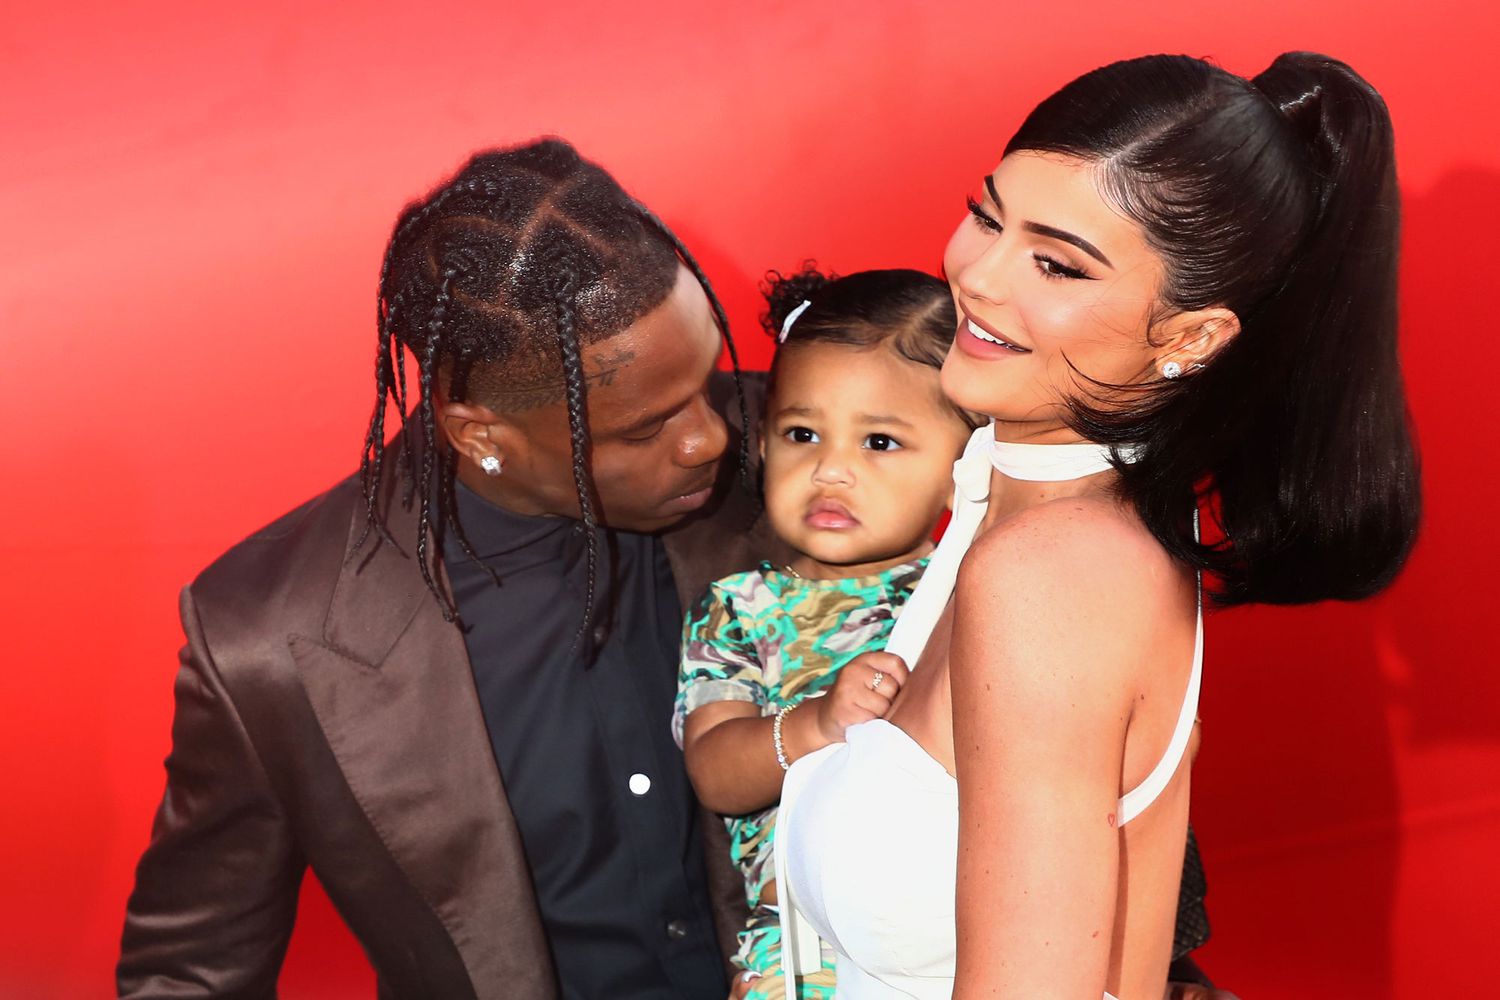 Pregnant Kylie Jenner Is 'Showing Off' Her Baby Bump to Friends, Source Says: 'She Is Excited' - PEOPLE